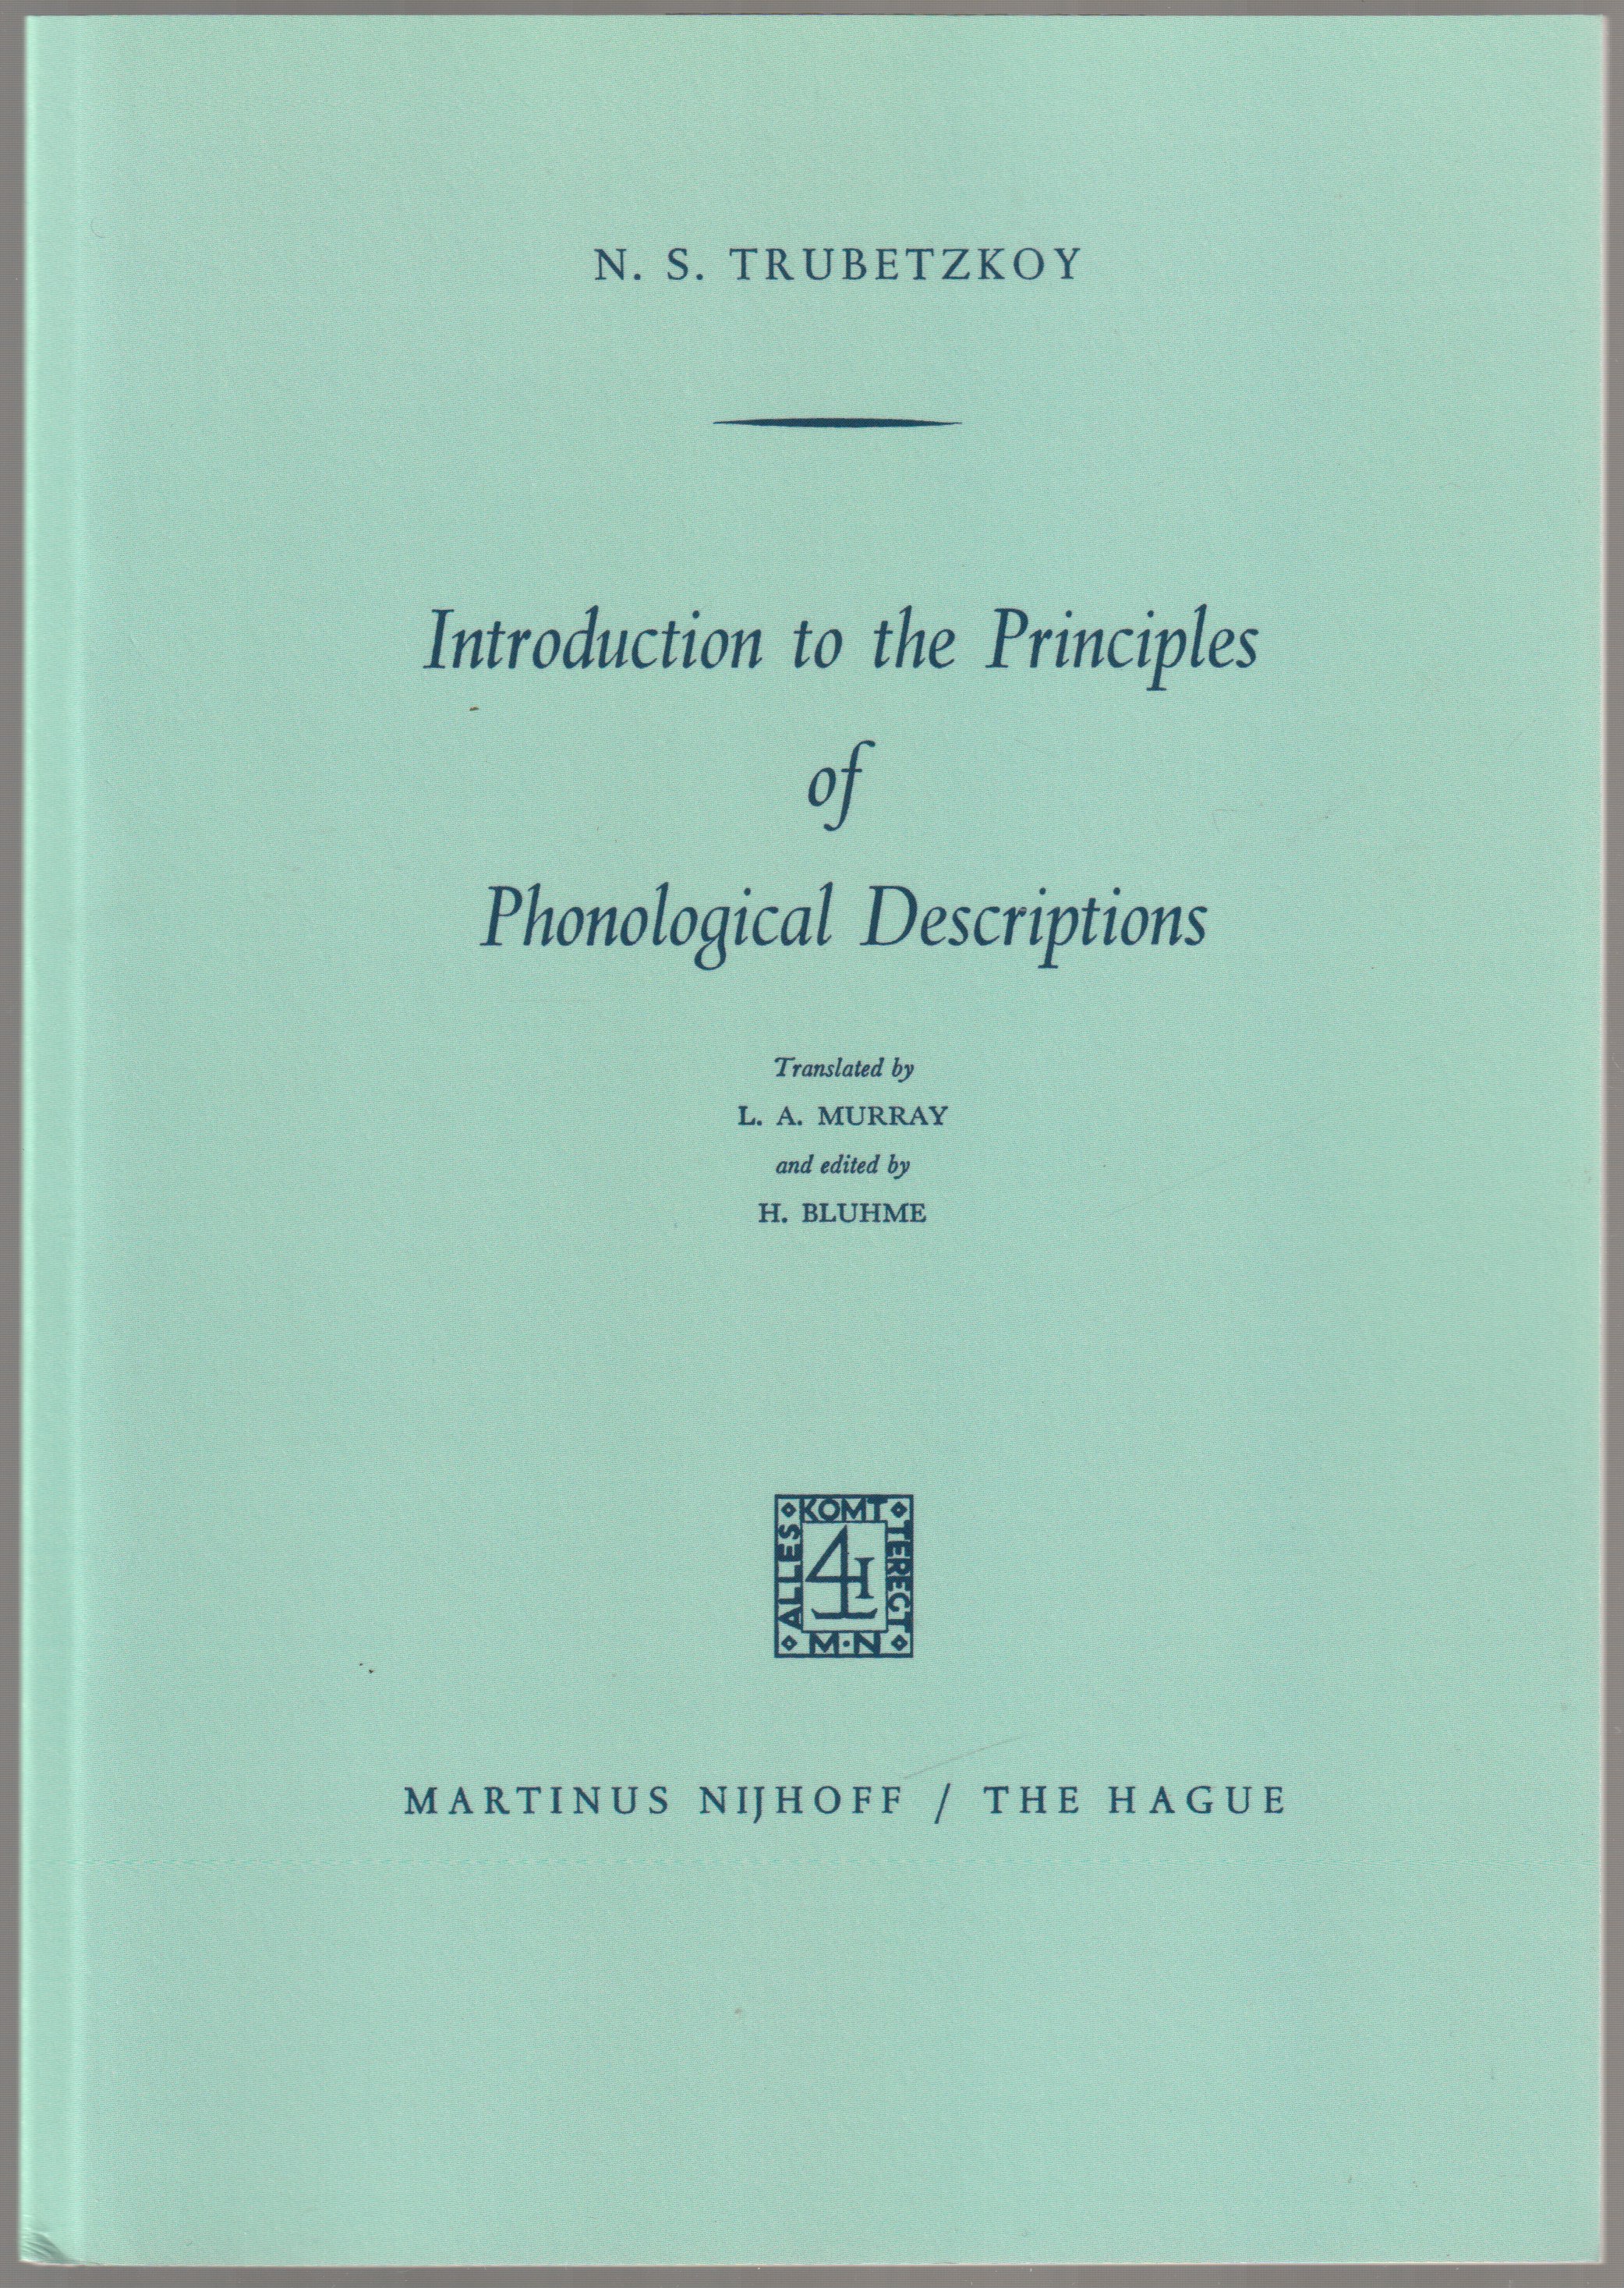 Introduction to the principles of phonological descriptions.